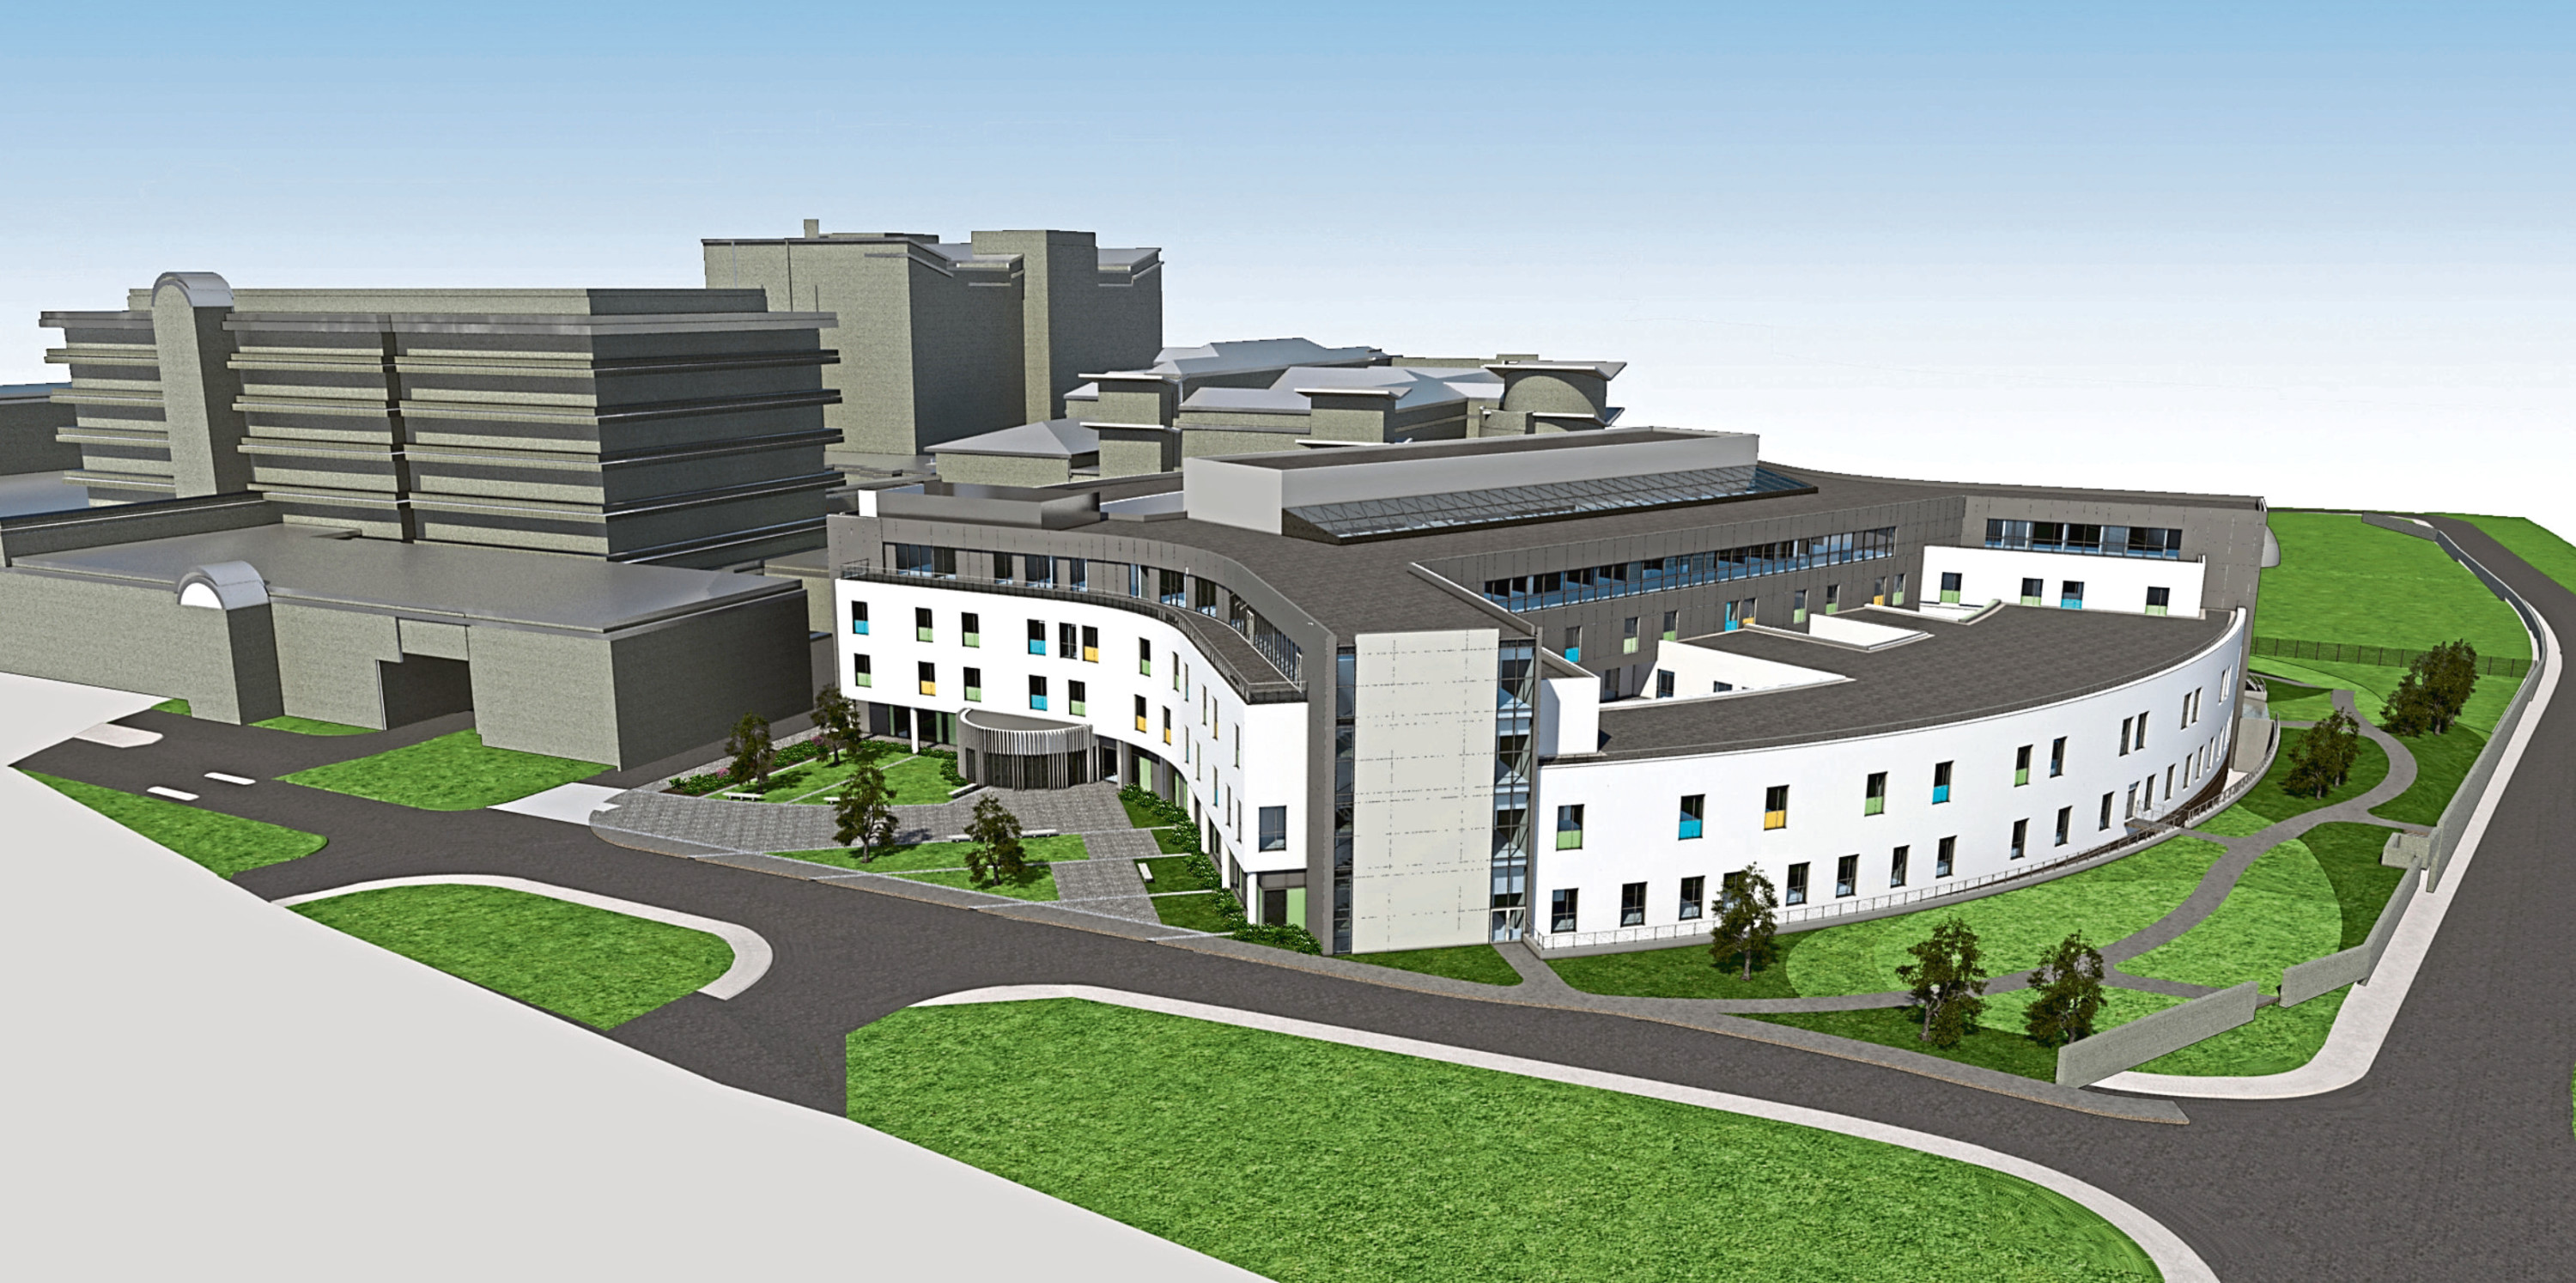 NHS Grampian announces review into £35m anticipated overspend on Aberdeen health facilities